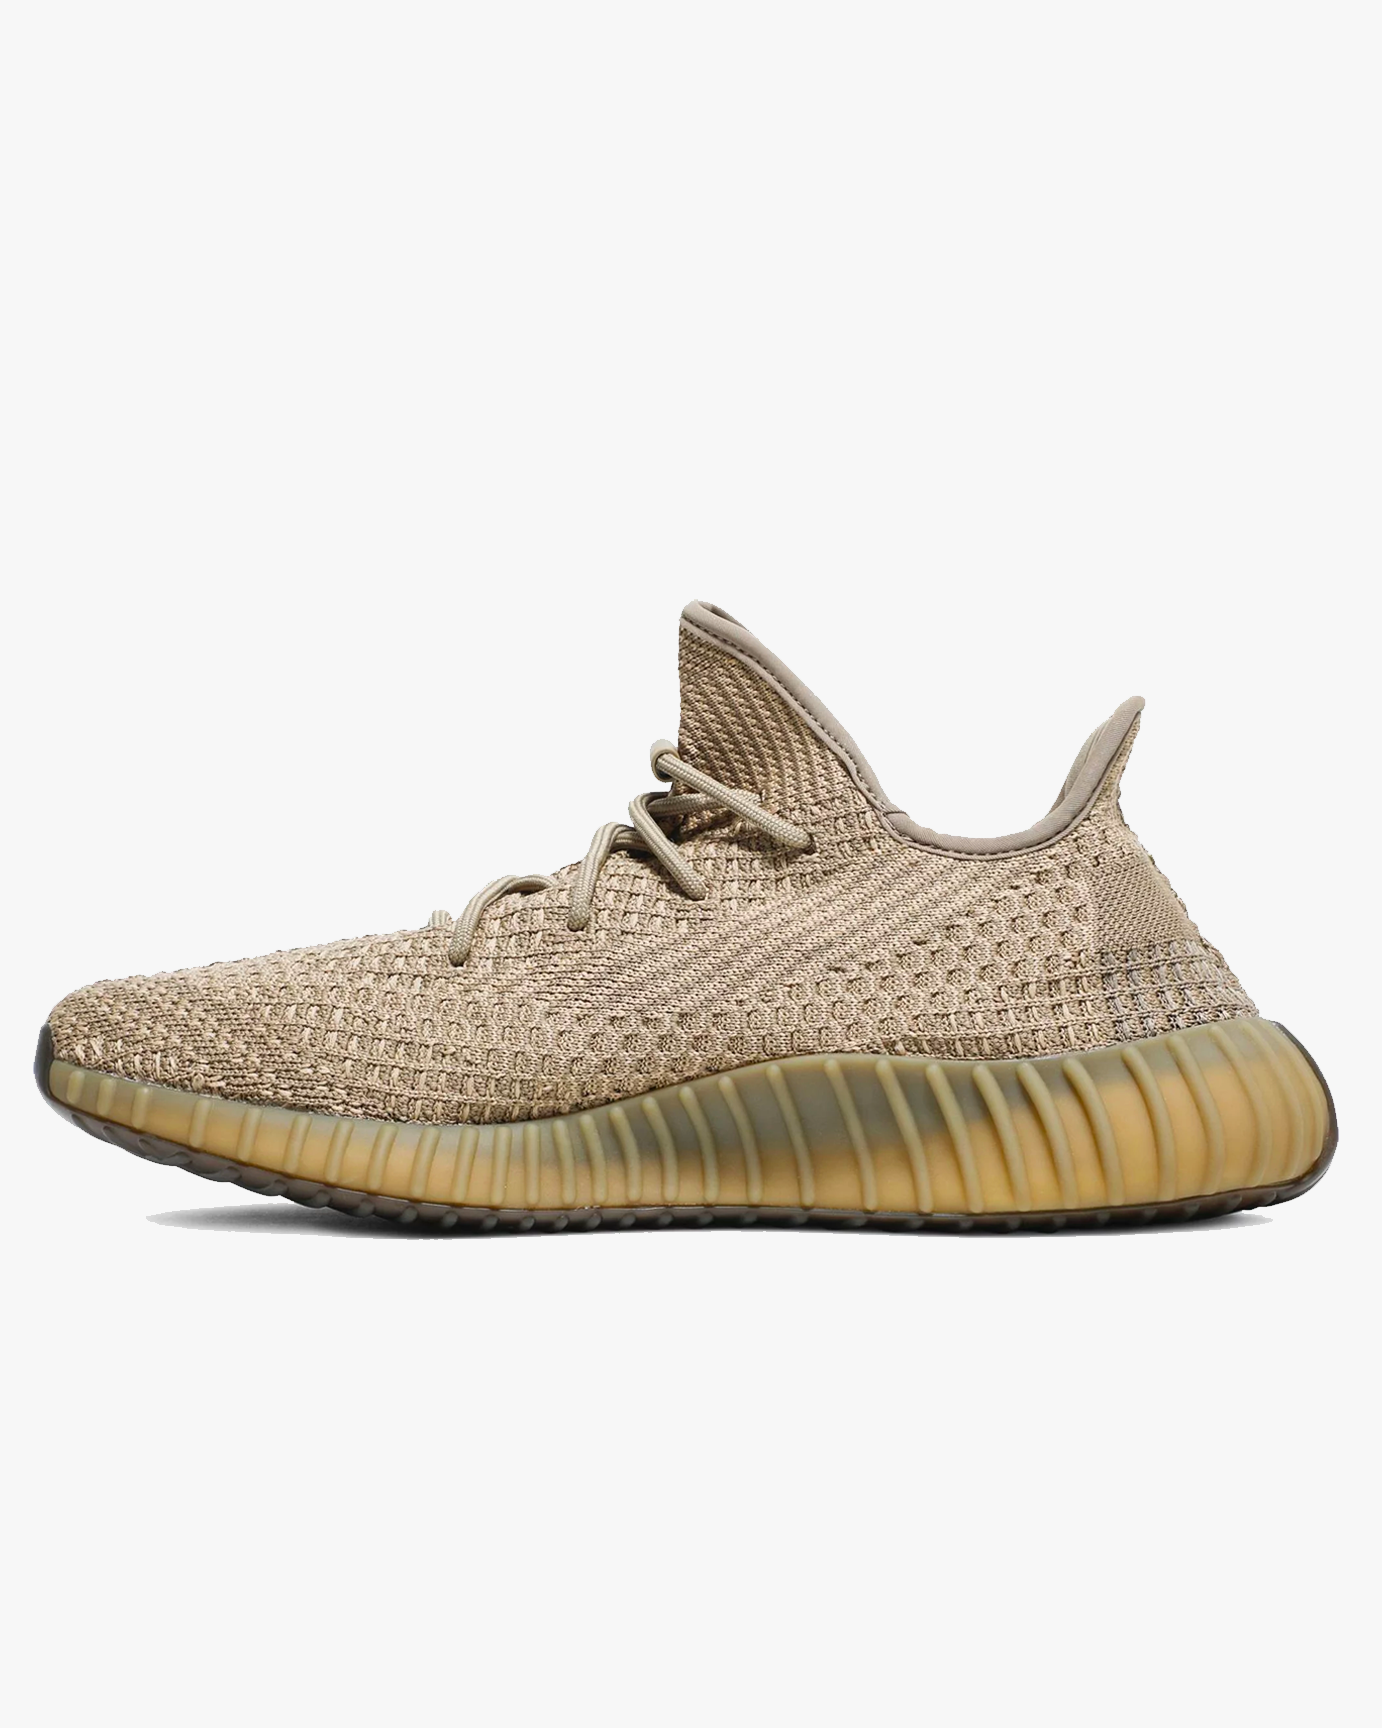 Yeezy Boost 350 V2 'Sand Taupe' | RARE LAB